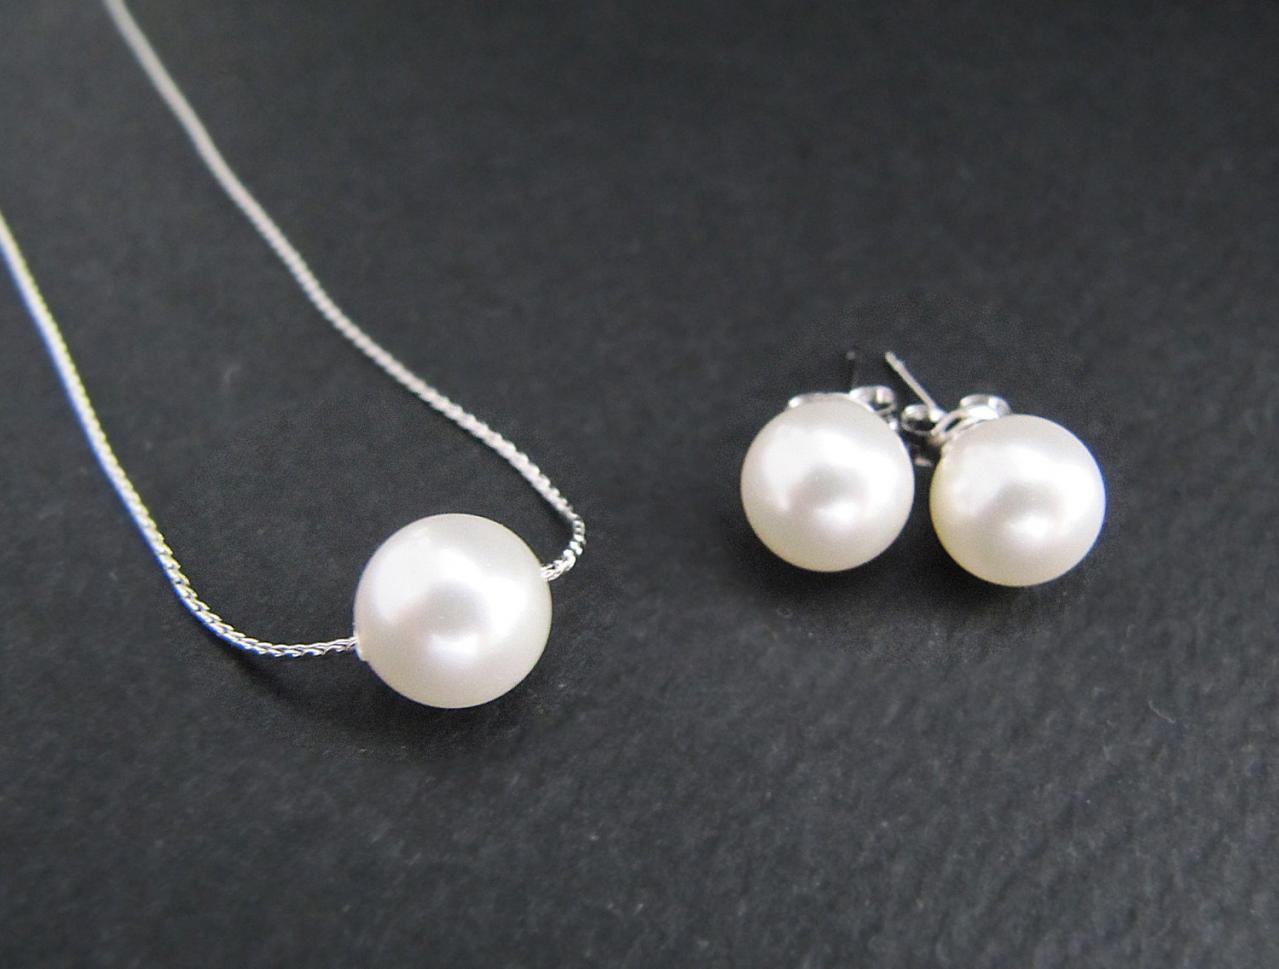 Sweet Crystal White Swarovski Pearls Ear Posts And Necklace Bridal Bridesmaid Jewelry Set